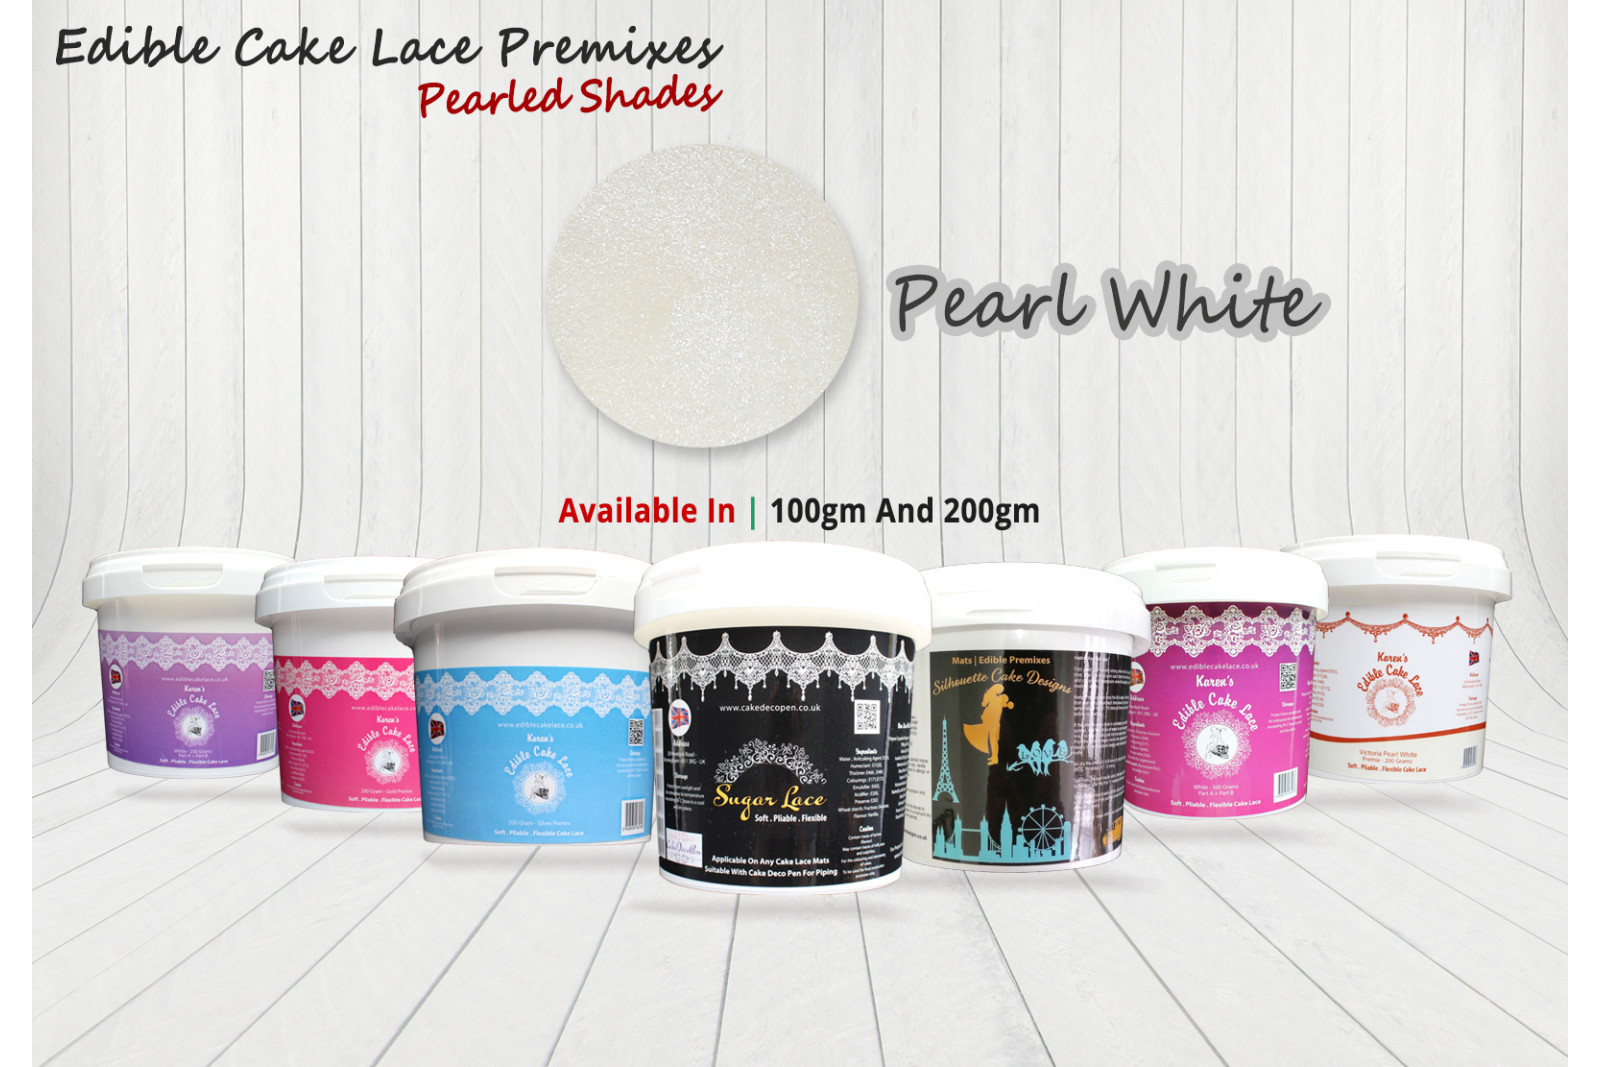 Pearl White | Edible Cake Lace Premixes | Pearled Shade | 200 Grams | Christmas Edible Decorating Essential